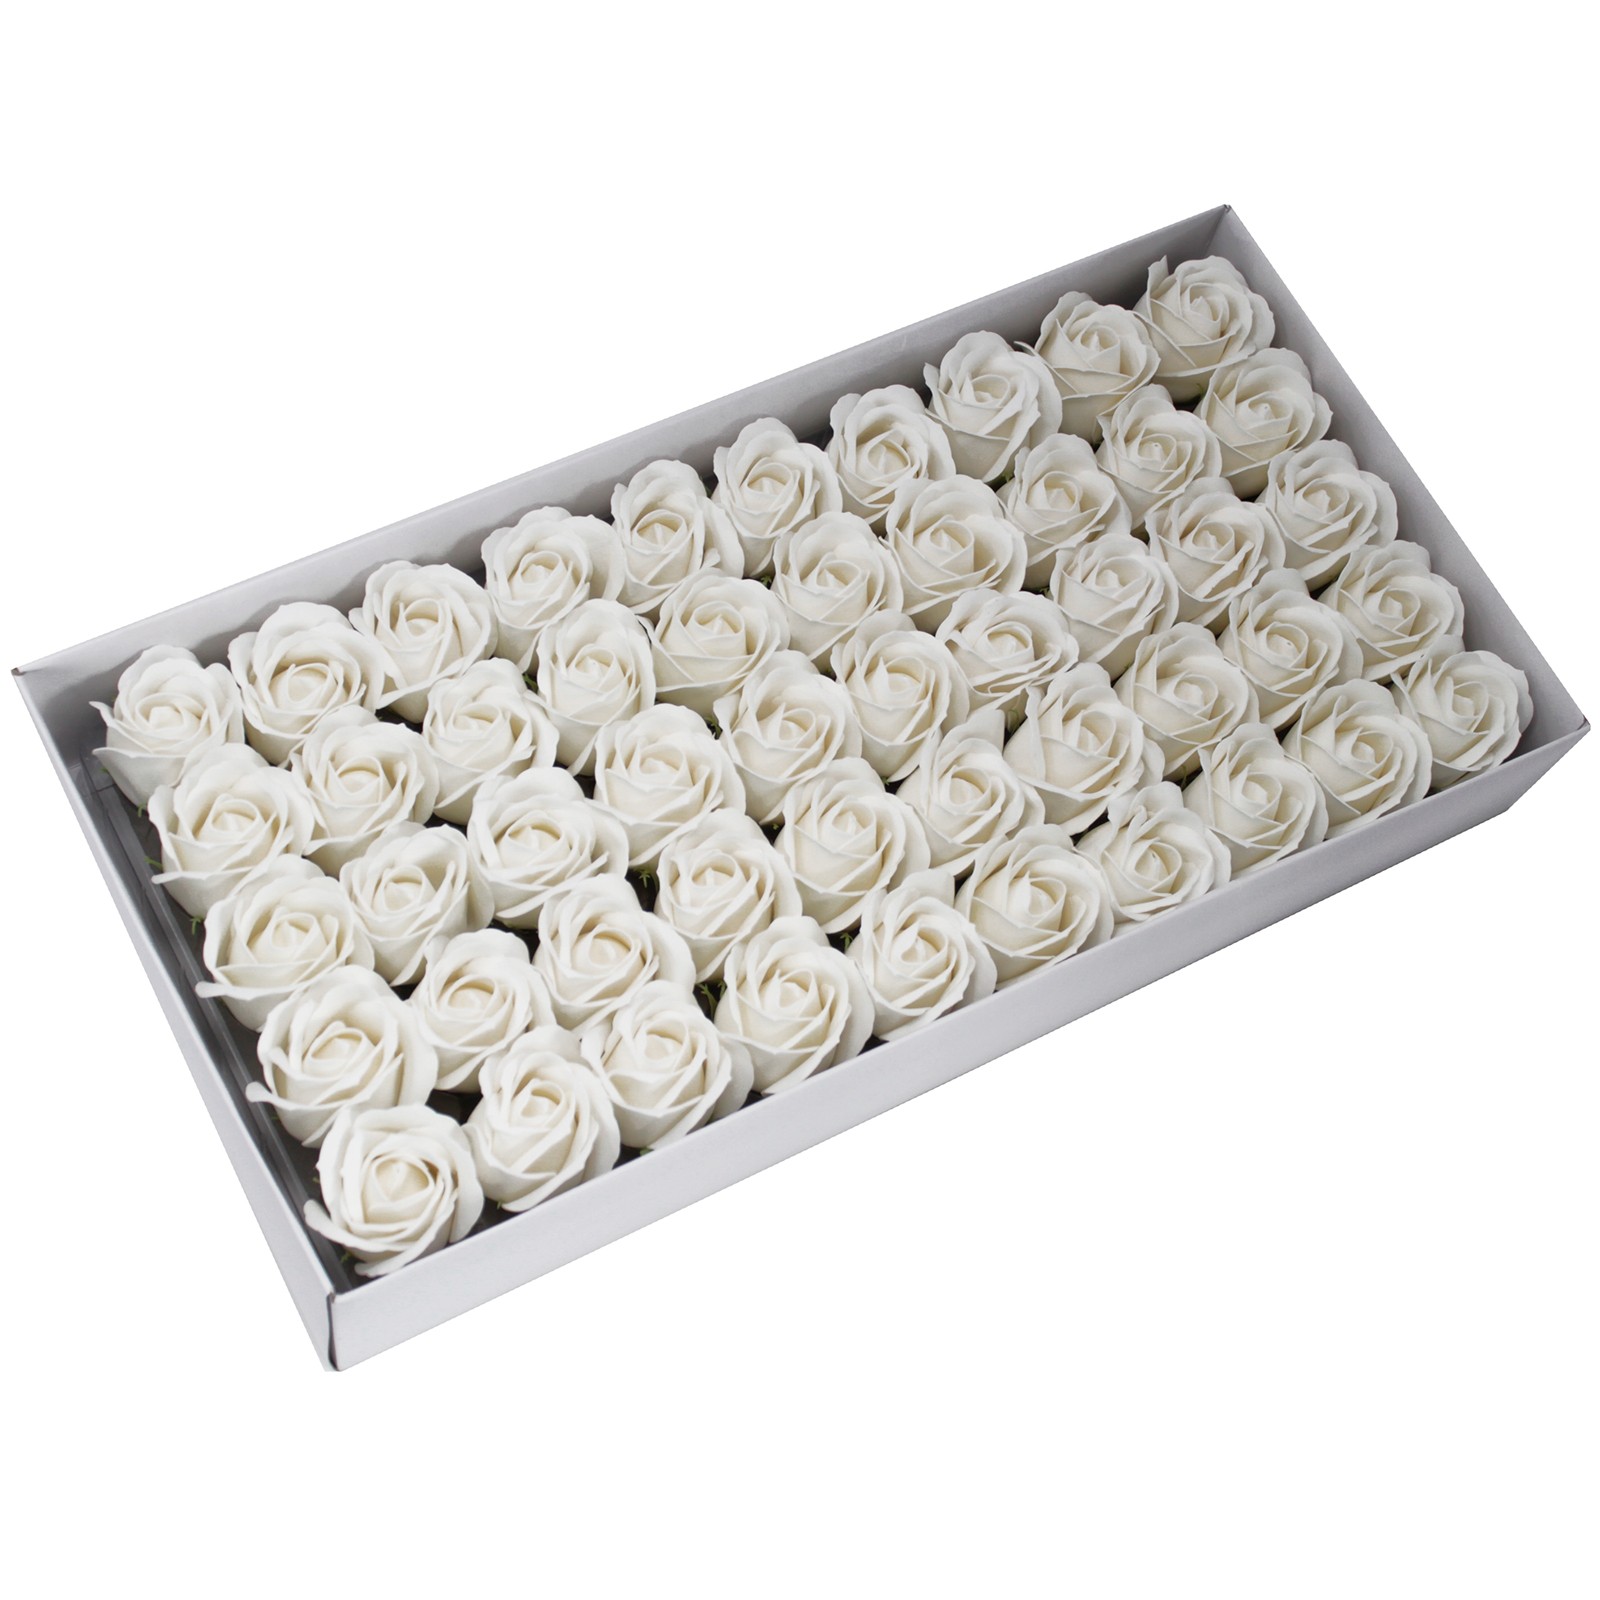 10 x Craft Soap Flowers - Med Rose - White - Click Image to Close